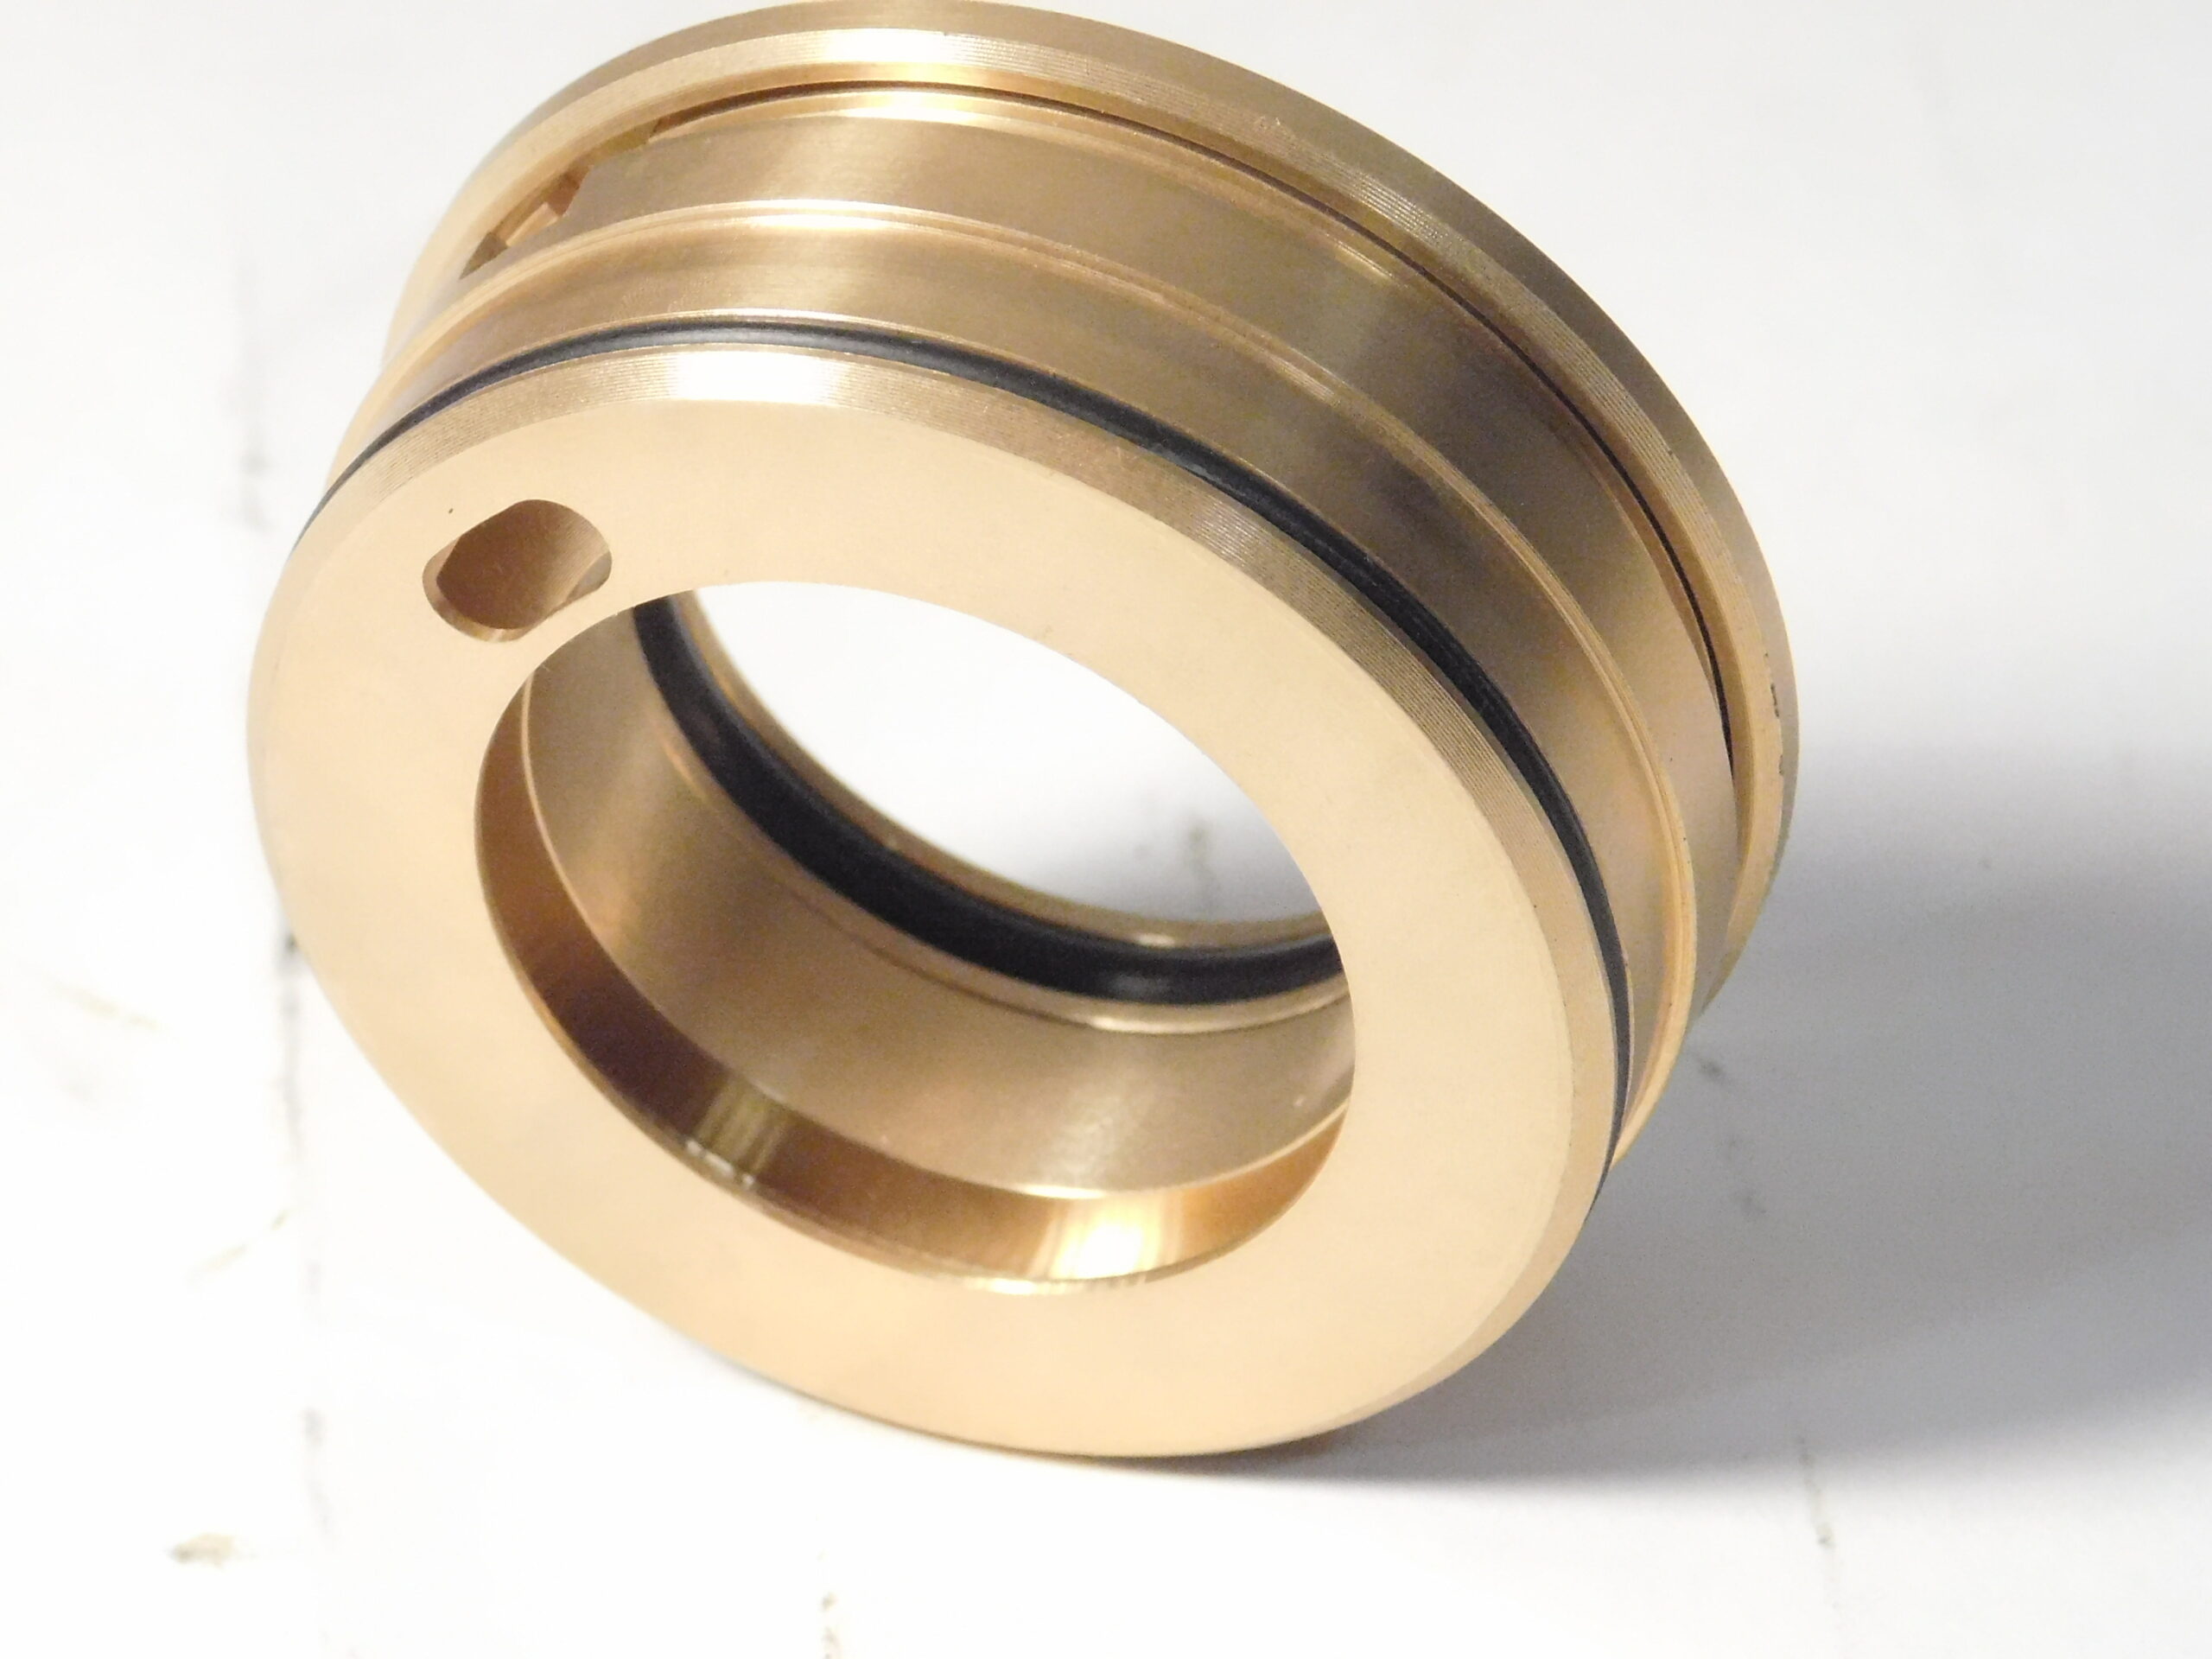 Details about  / INPRO// SEAL Bearing Isolator 1787-A-00245-0 NEW